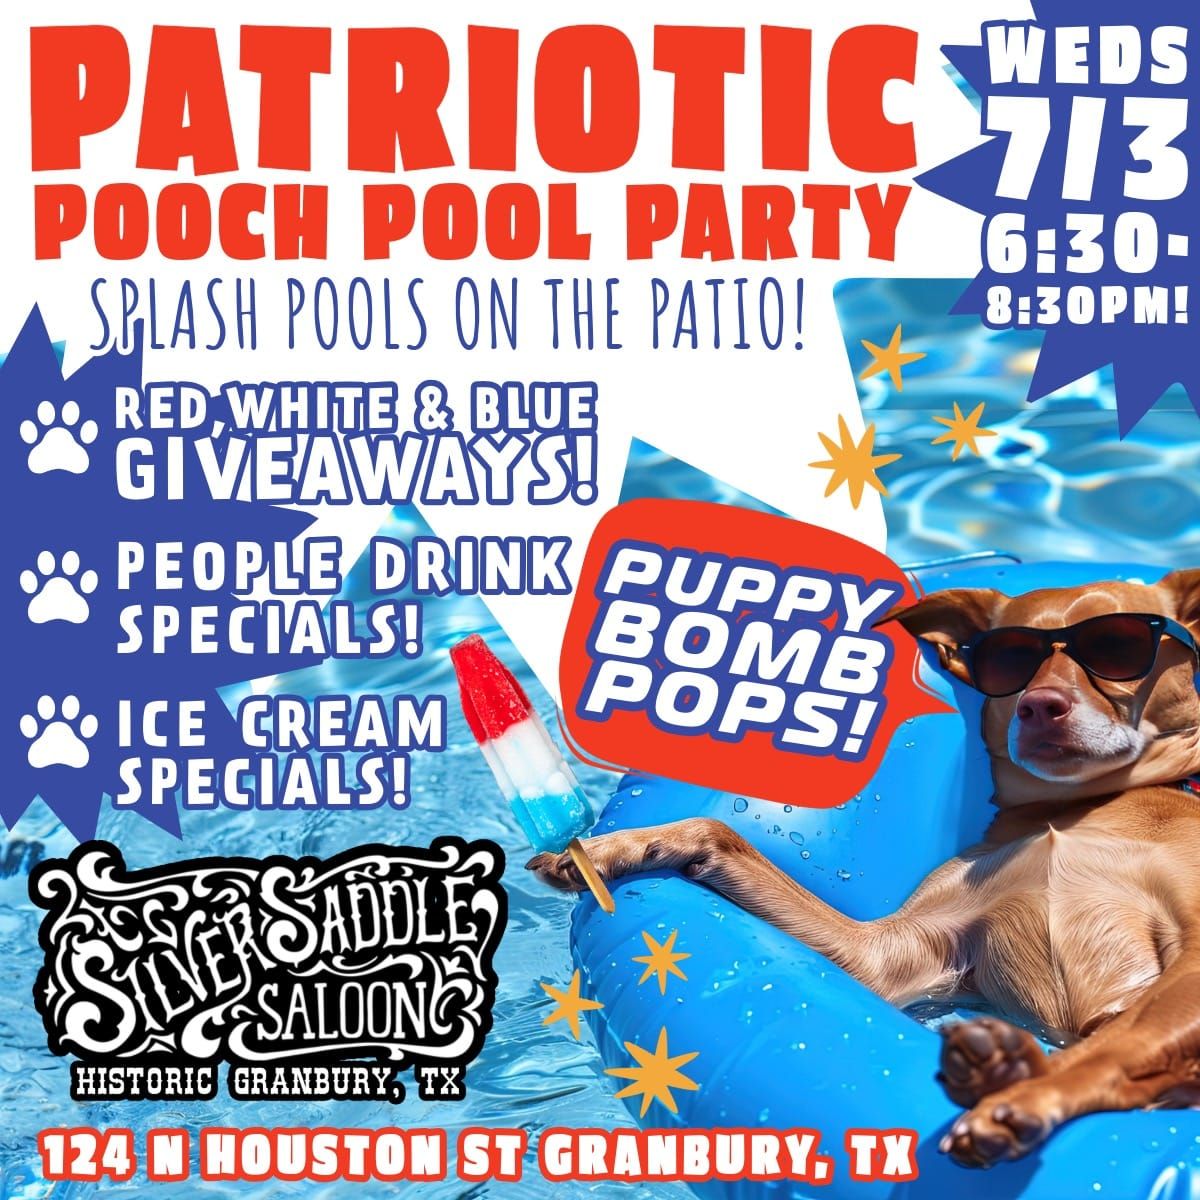 Yappy Hour at Silver Saddle Saloon!